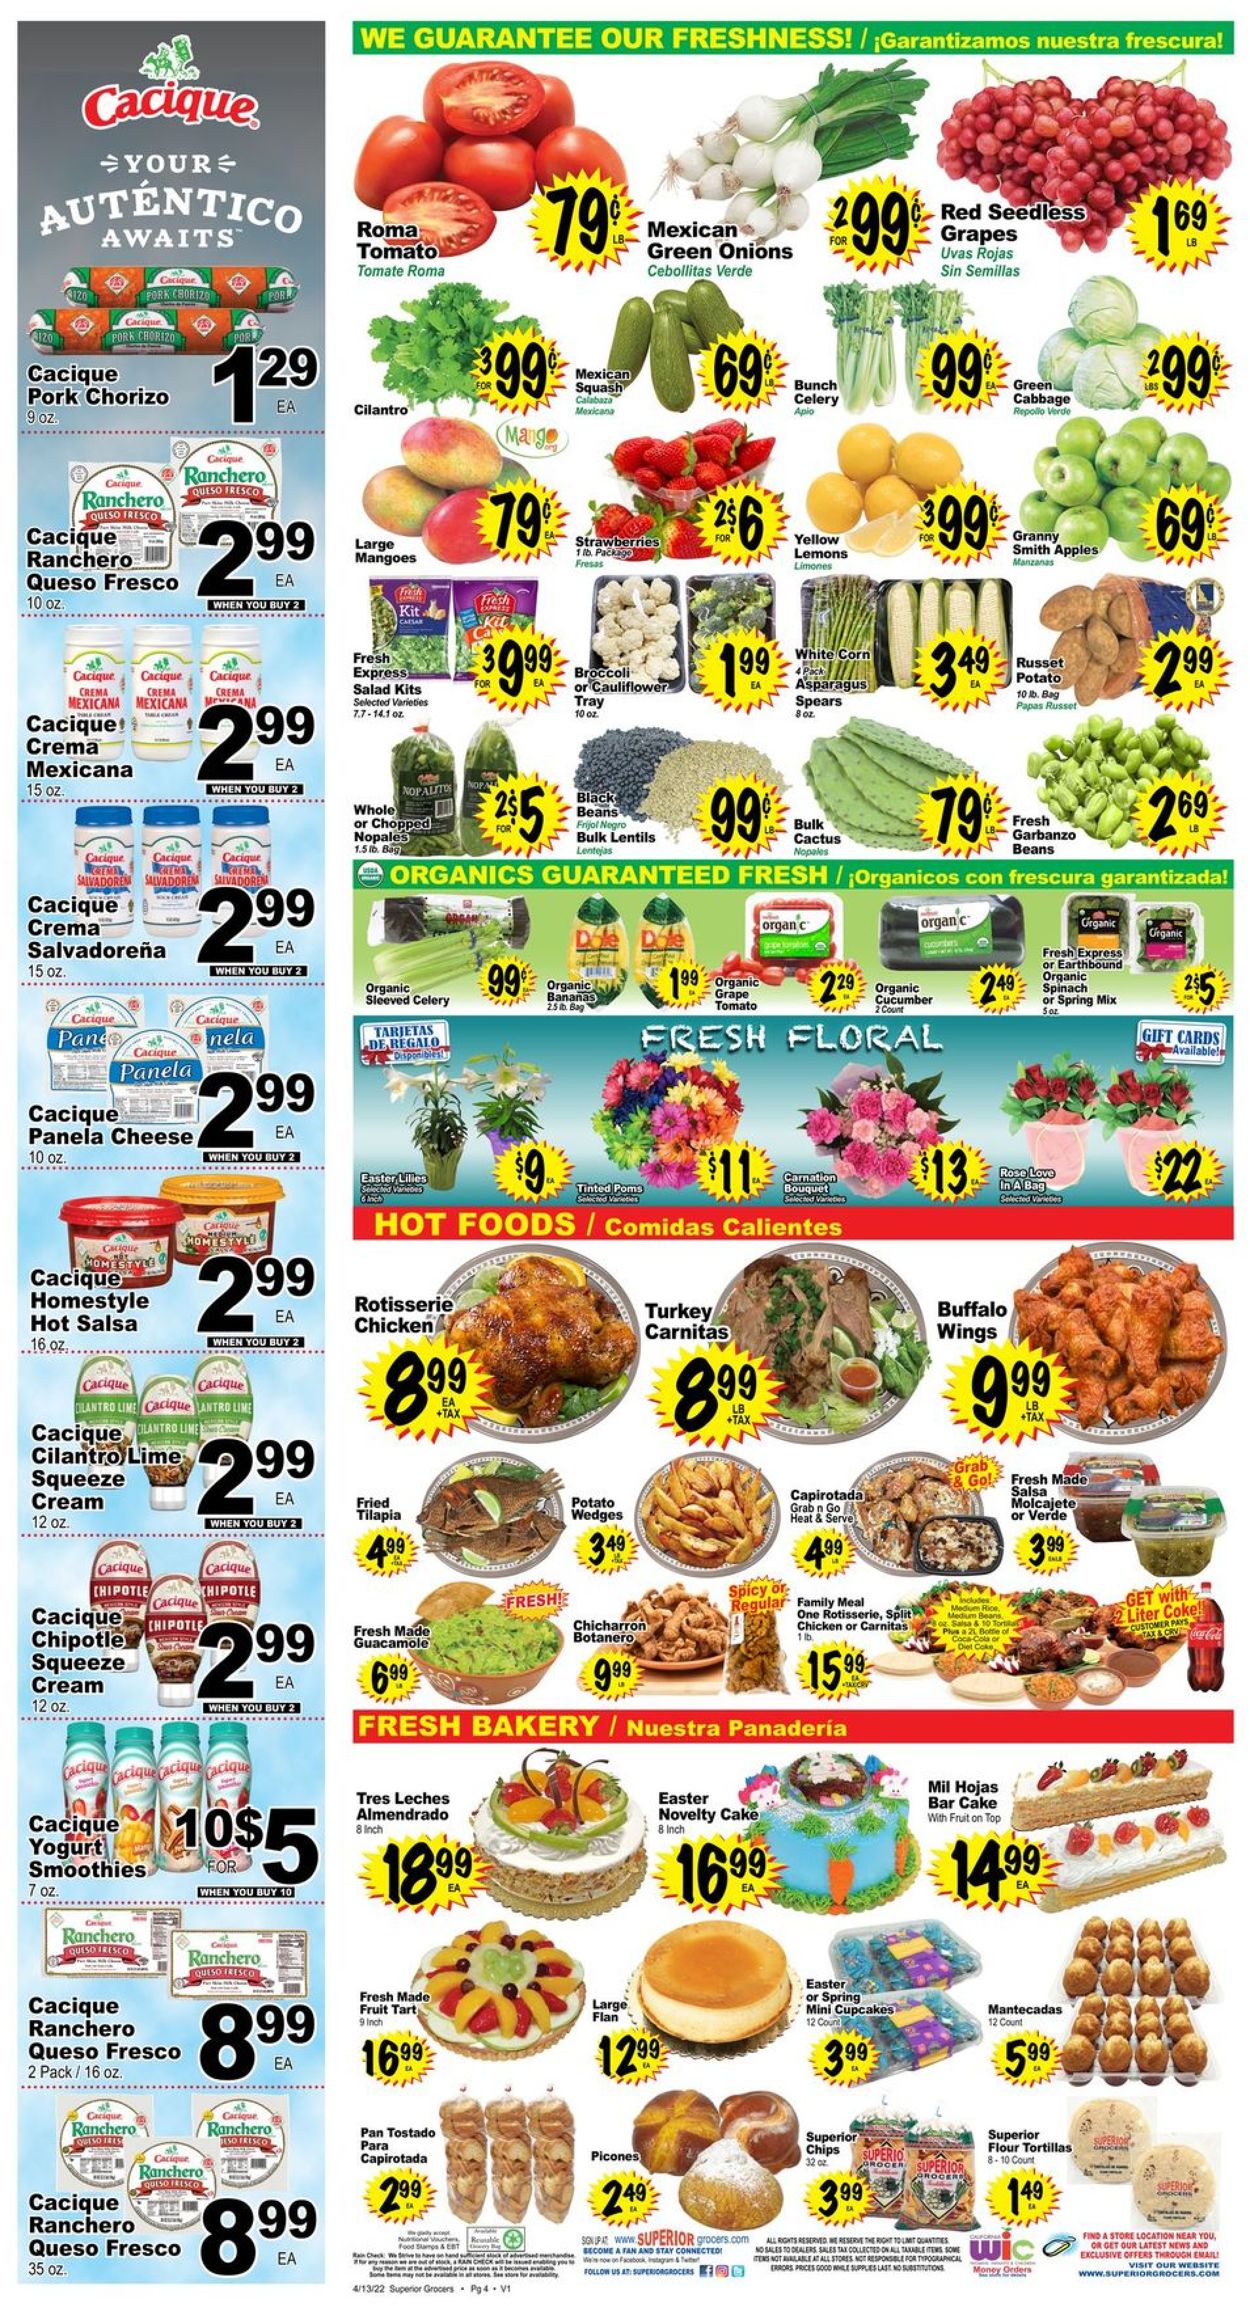 Catalogue Superior Grocers EASTER 2022 from 04/13/2022